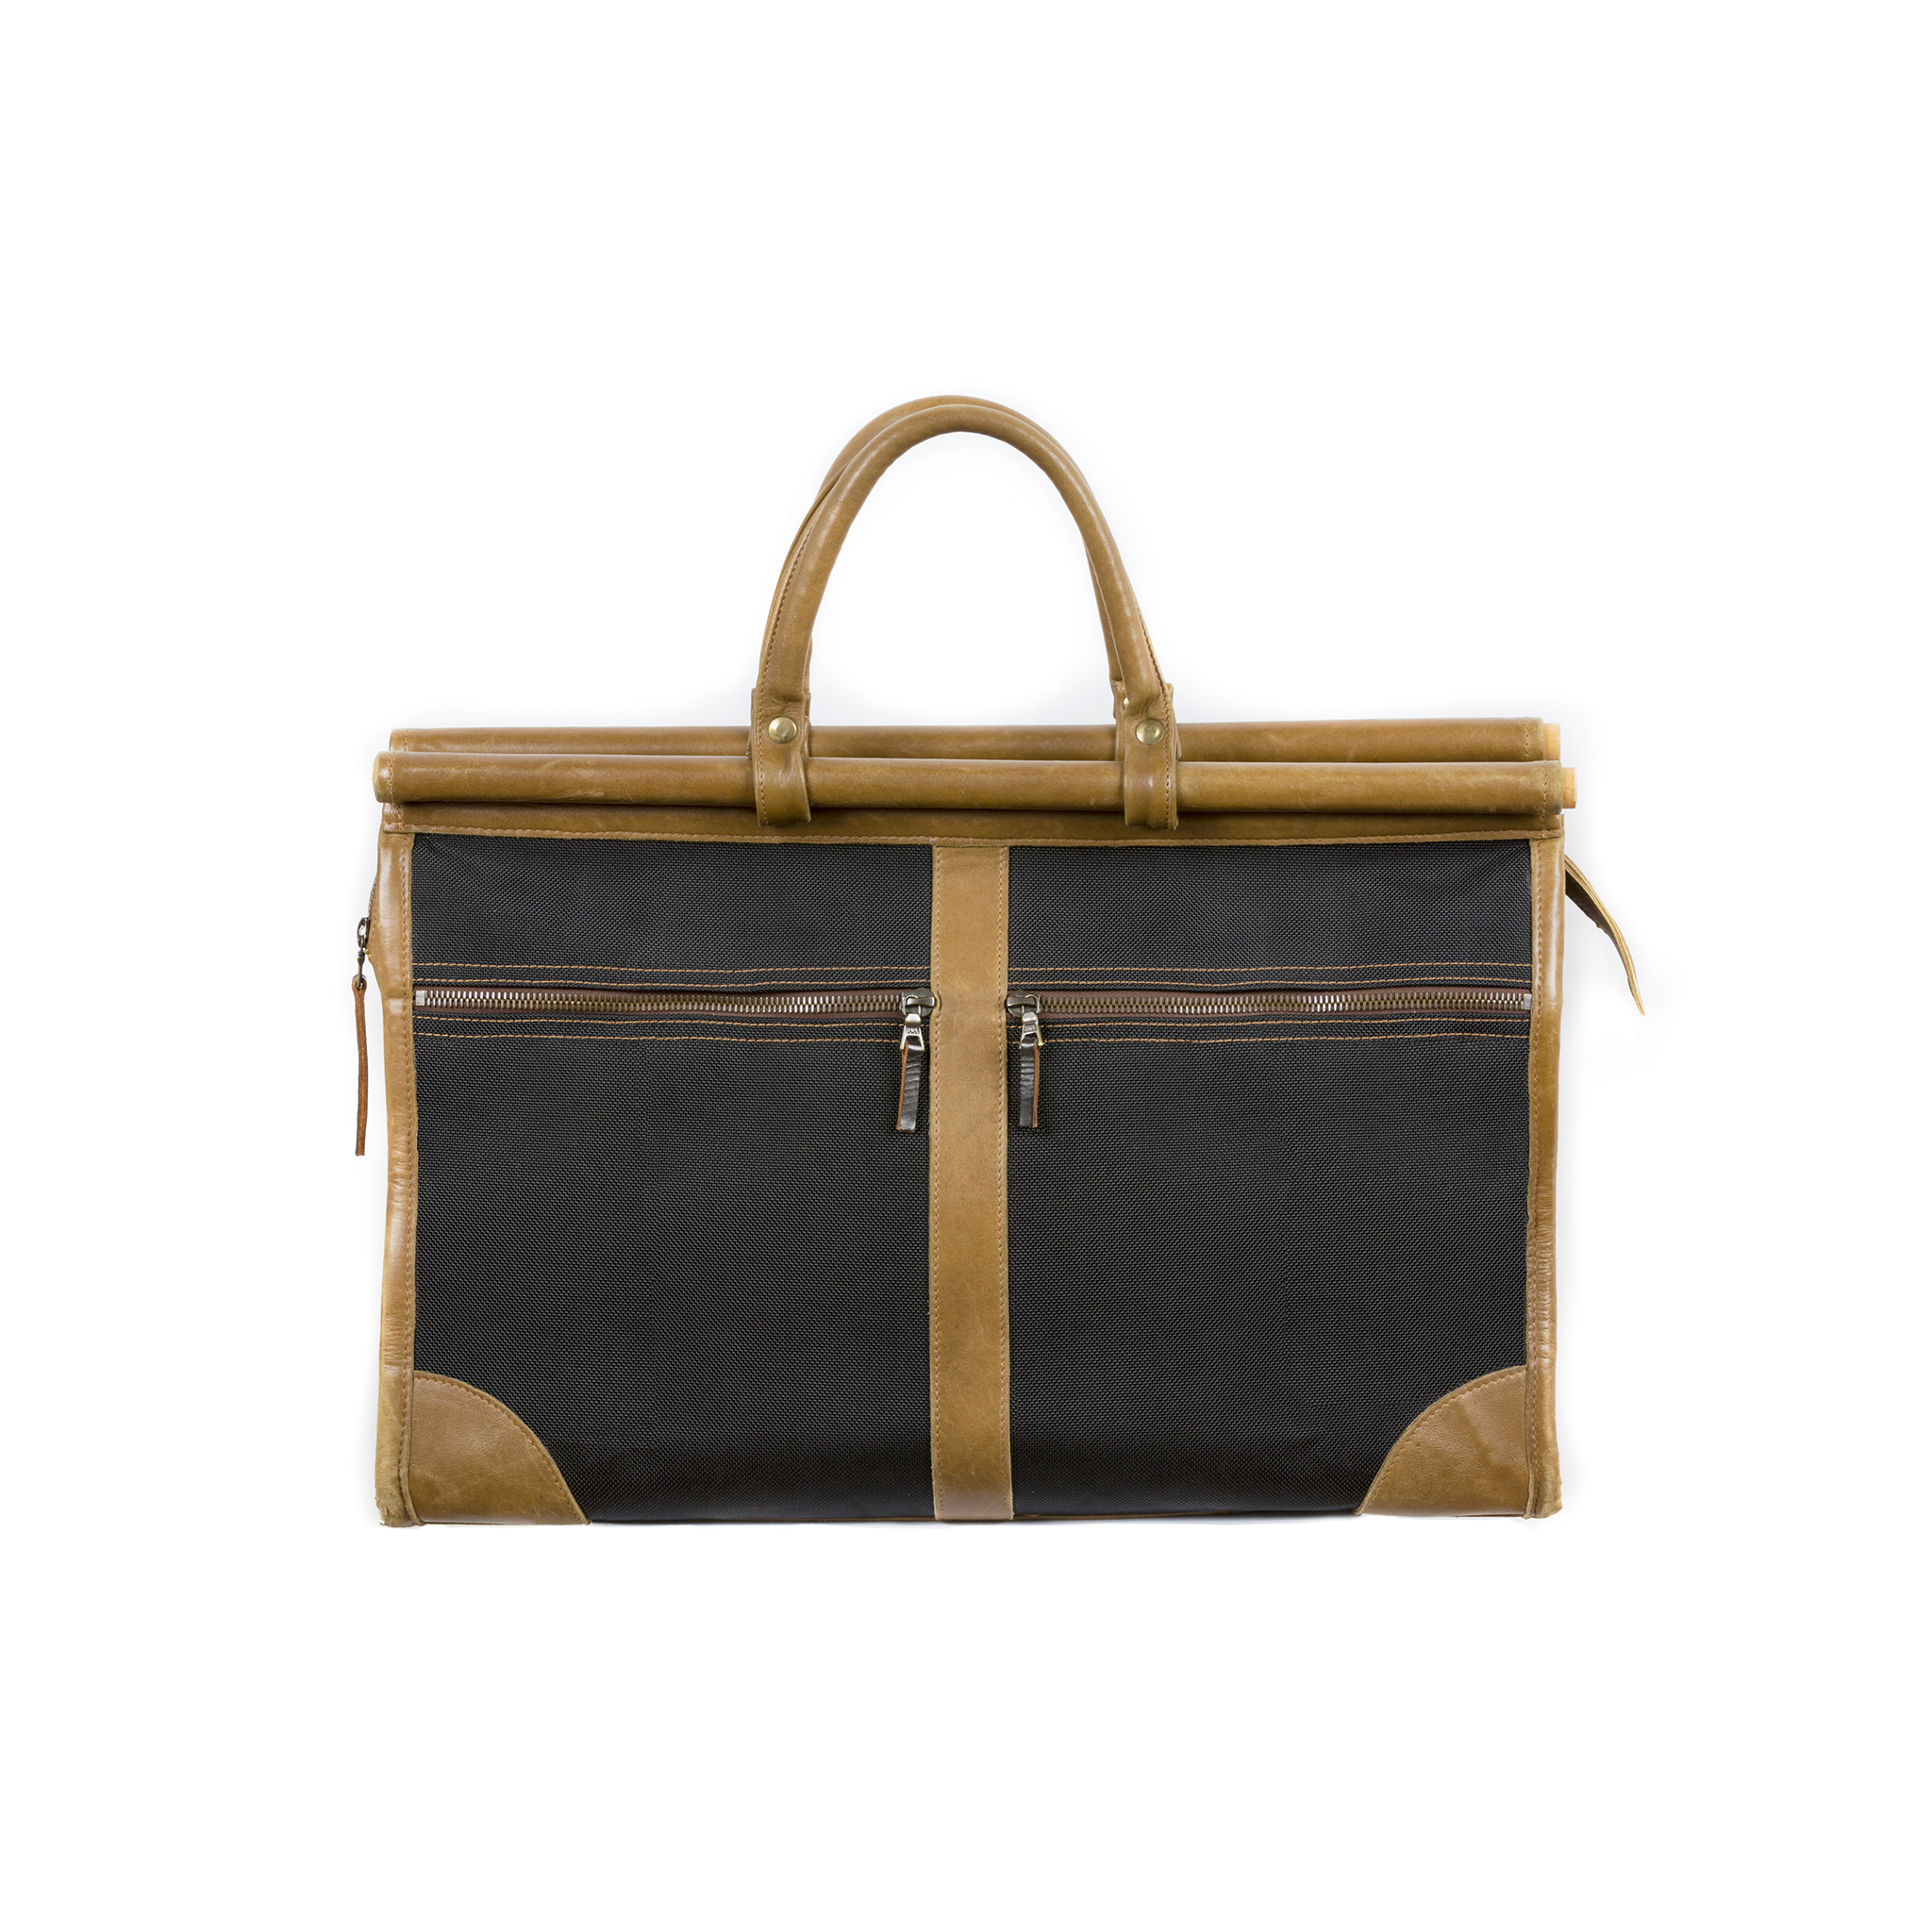 Hunting Bag - Carbone fabric and glossy leather